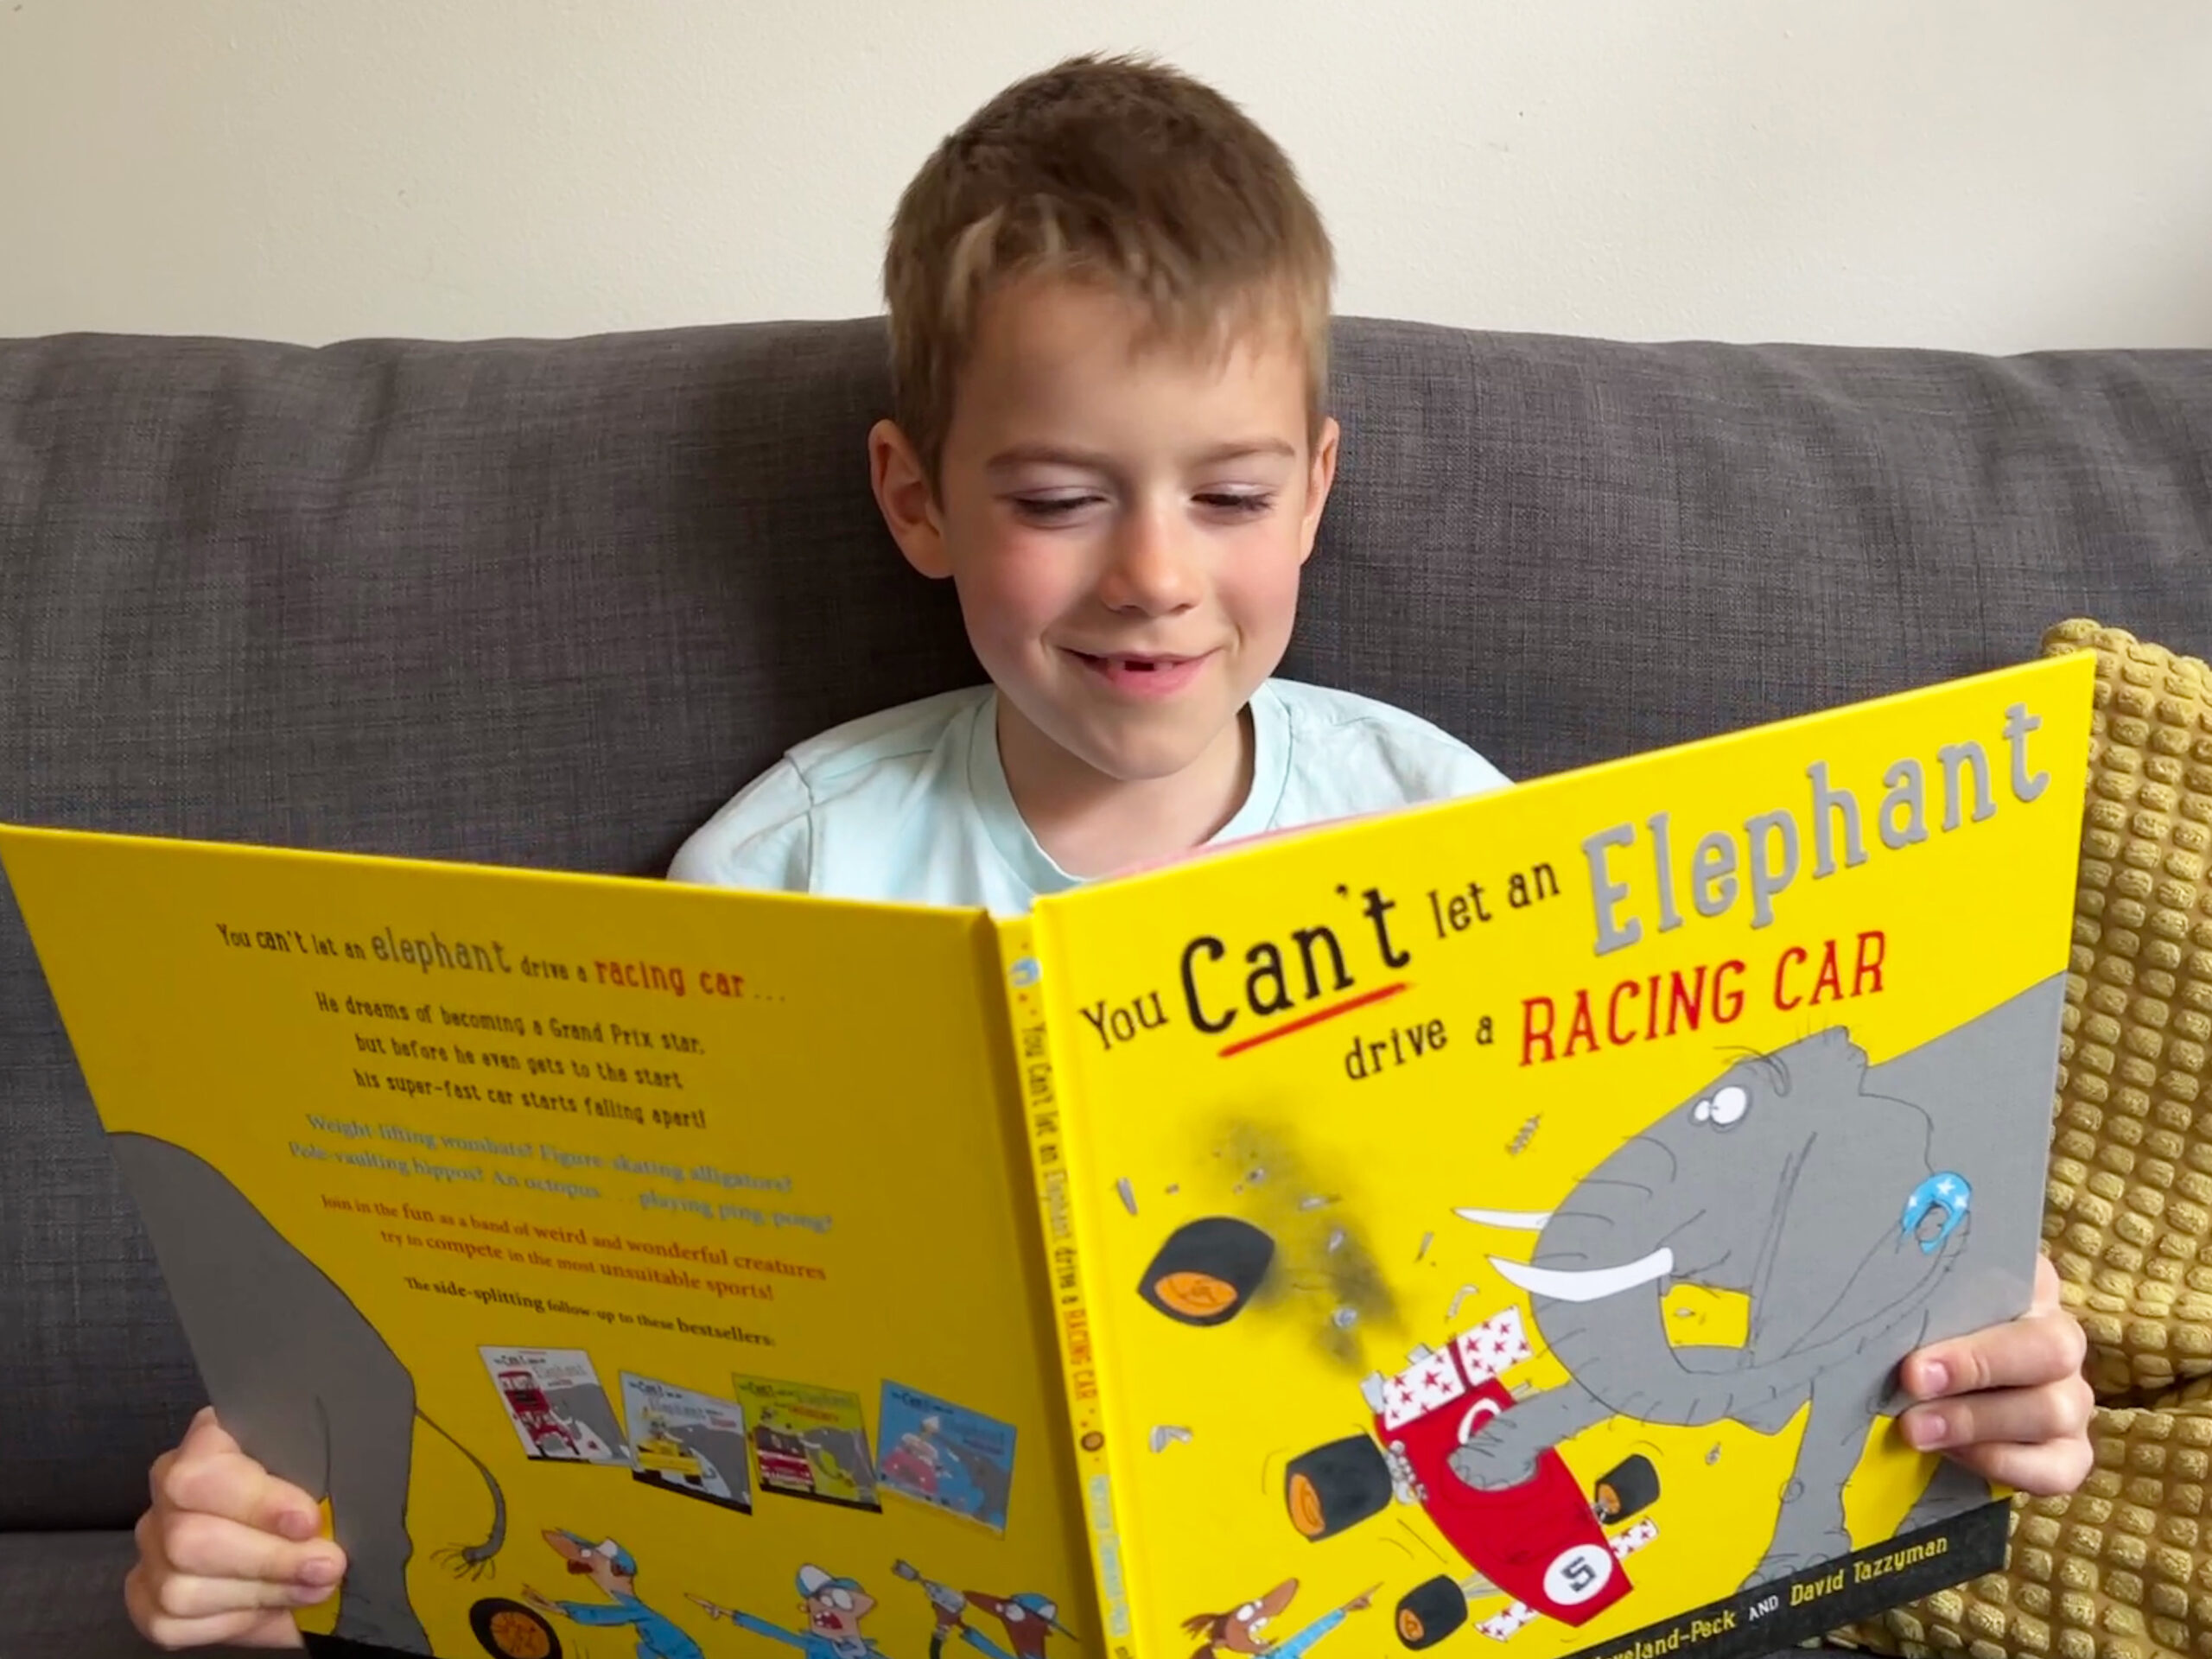 You can't let an elephant drive a racing car book